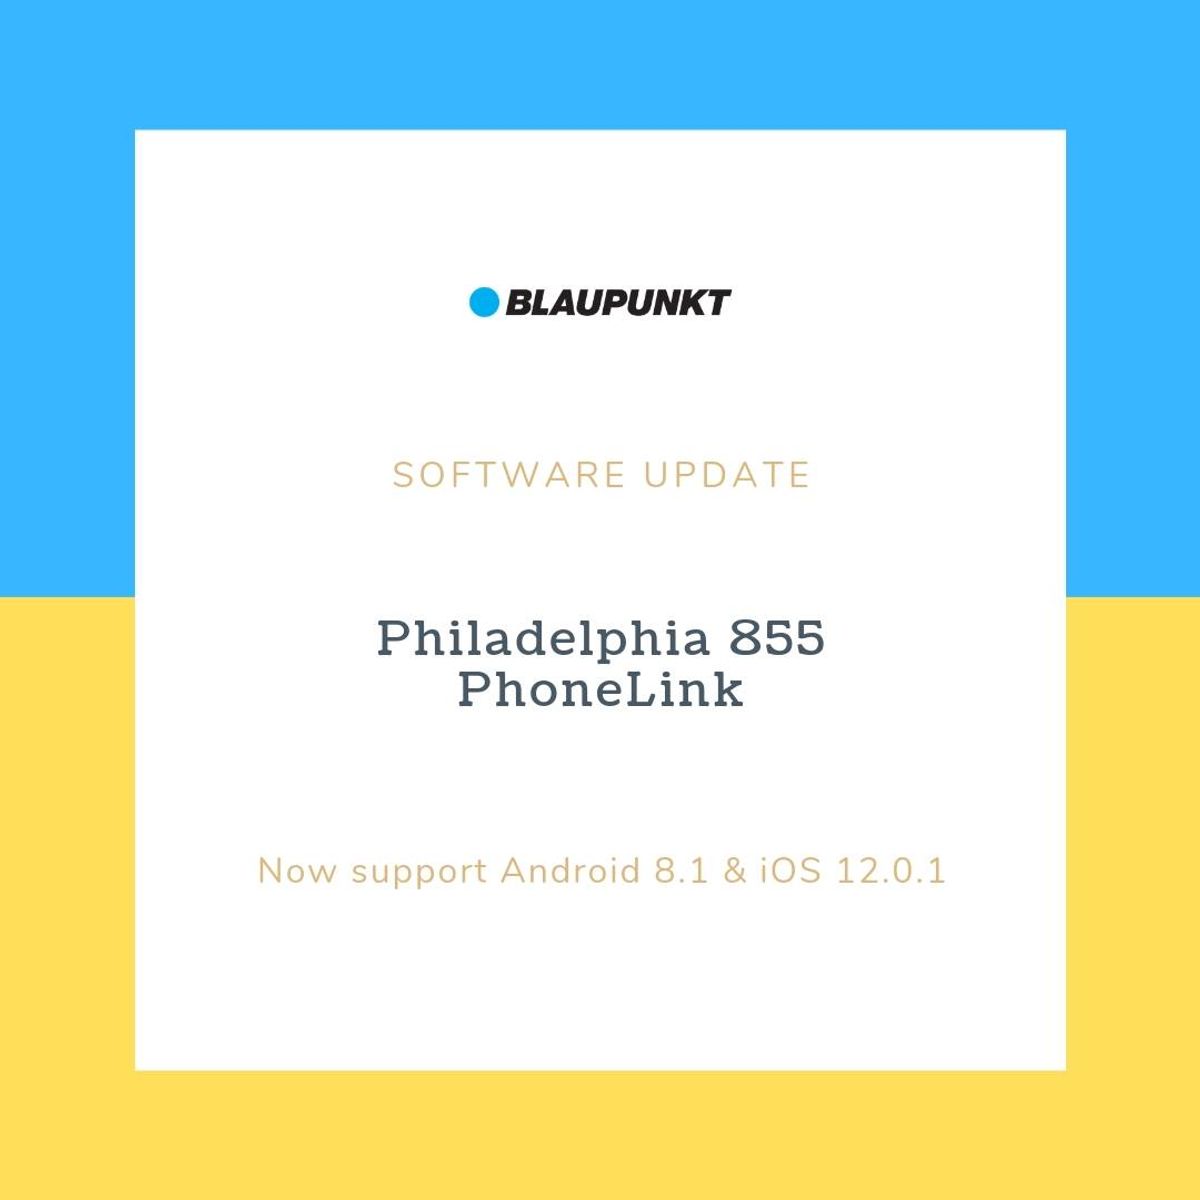 Blaupunkt Philadelphia 855's PhoneLink now support Android 8.1 & iOS 12.0.1